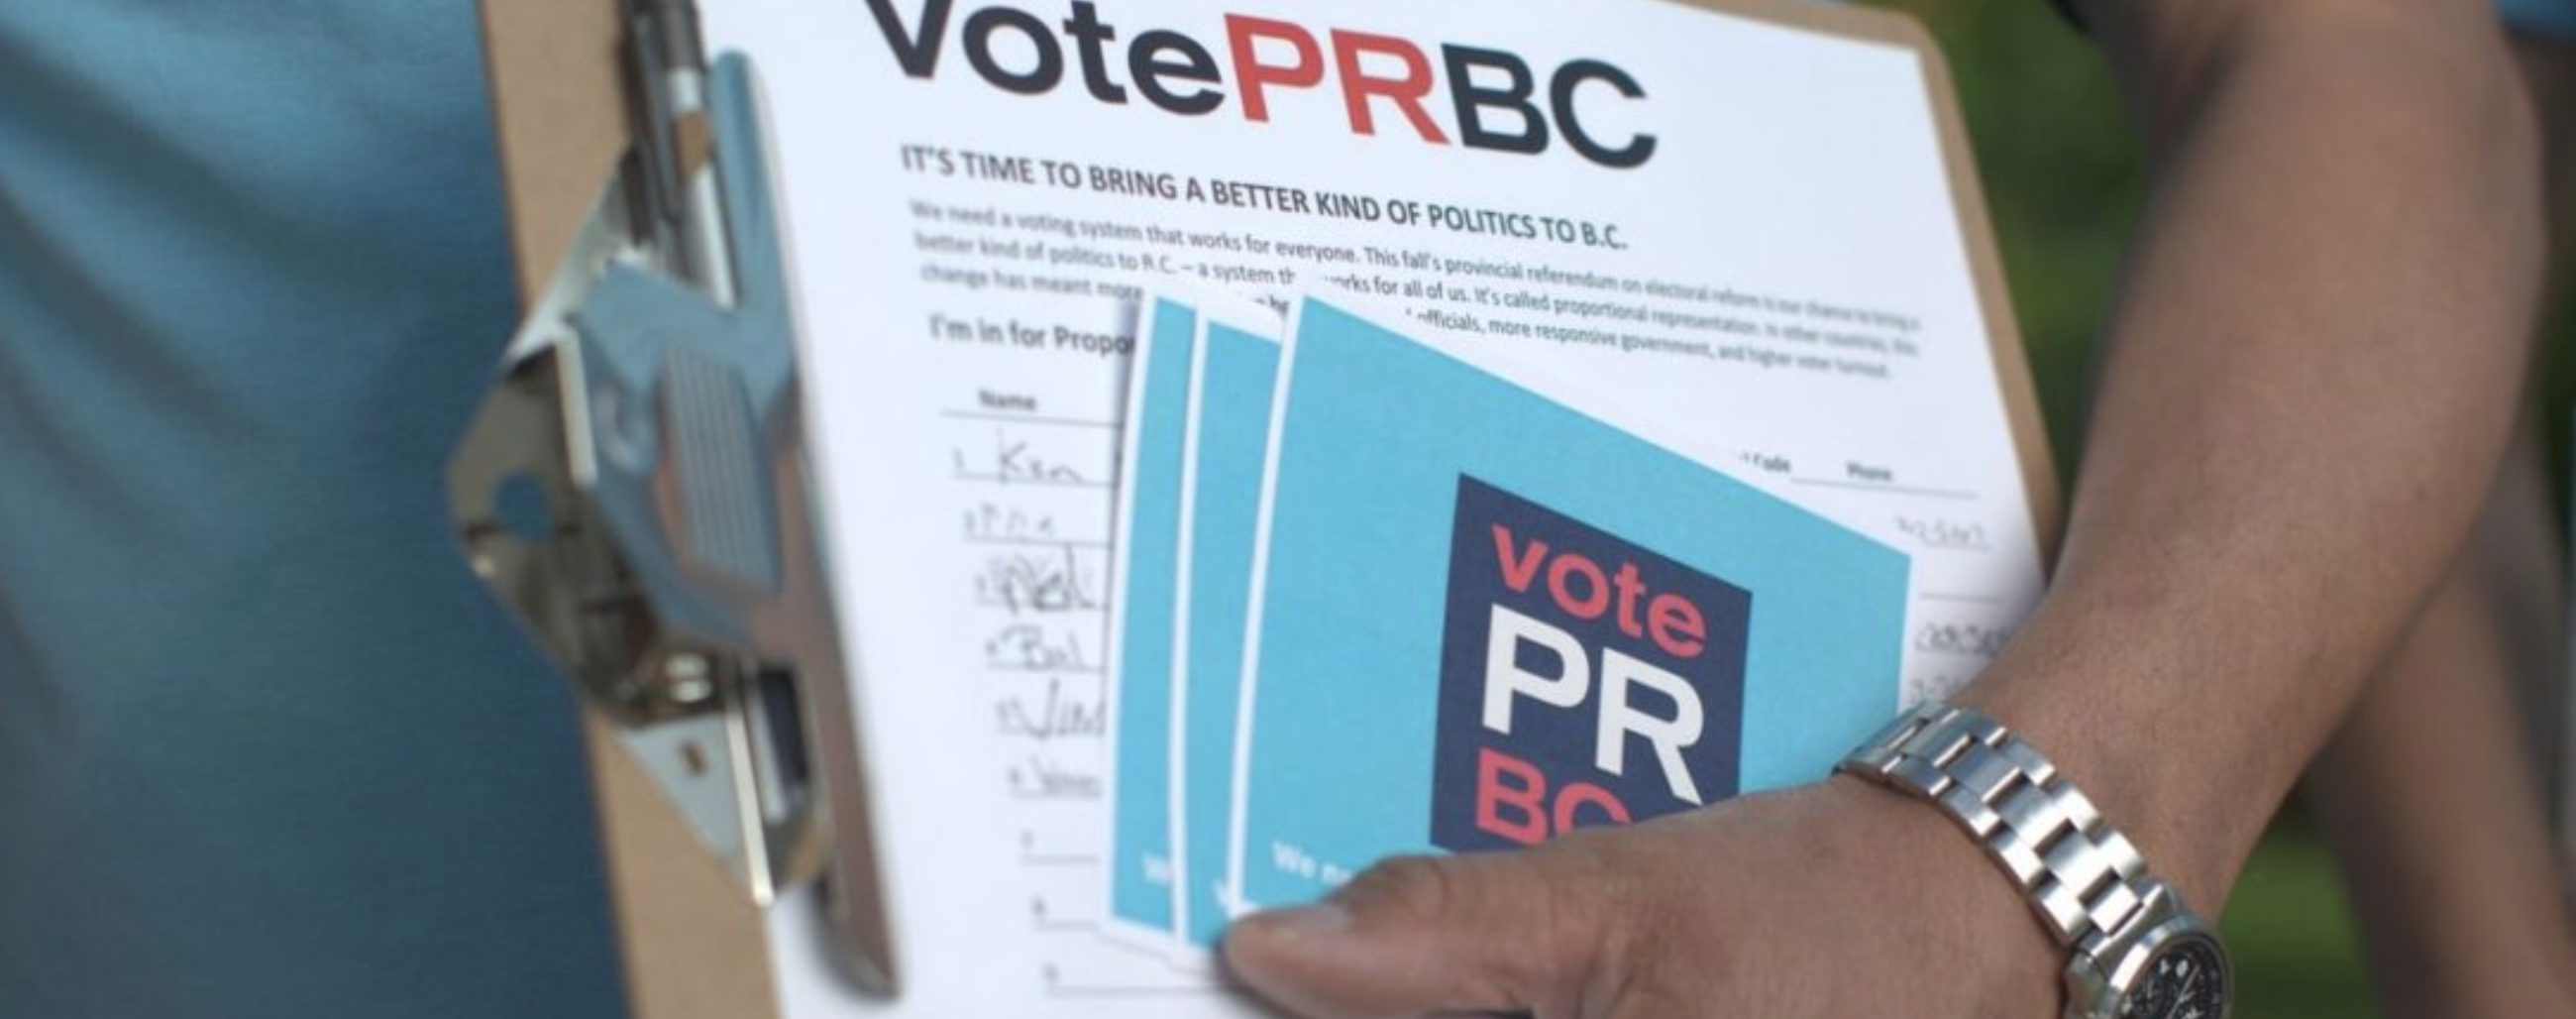 Surrey lawyer says Proportional Representation will create a more transparent, collaborative government